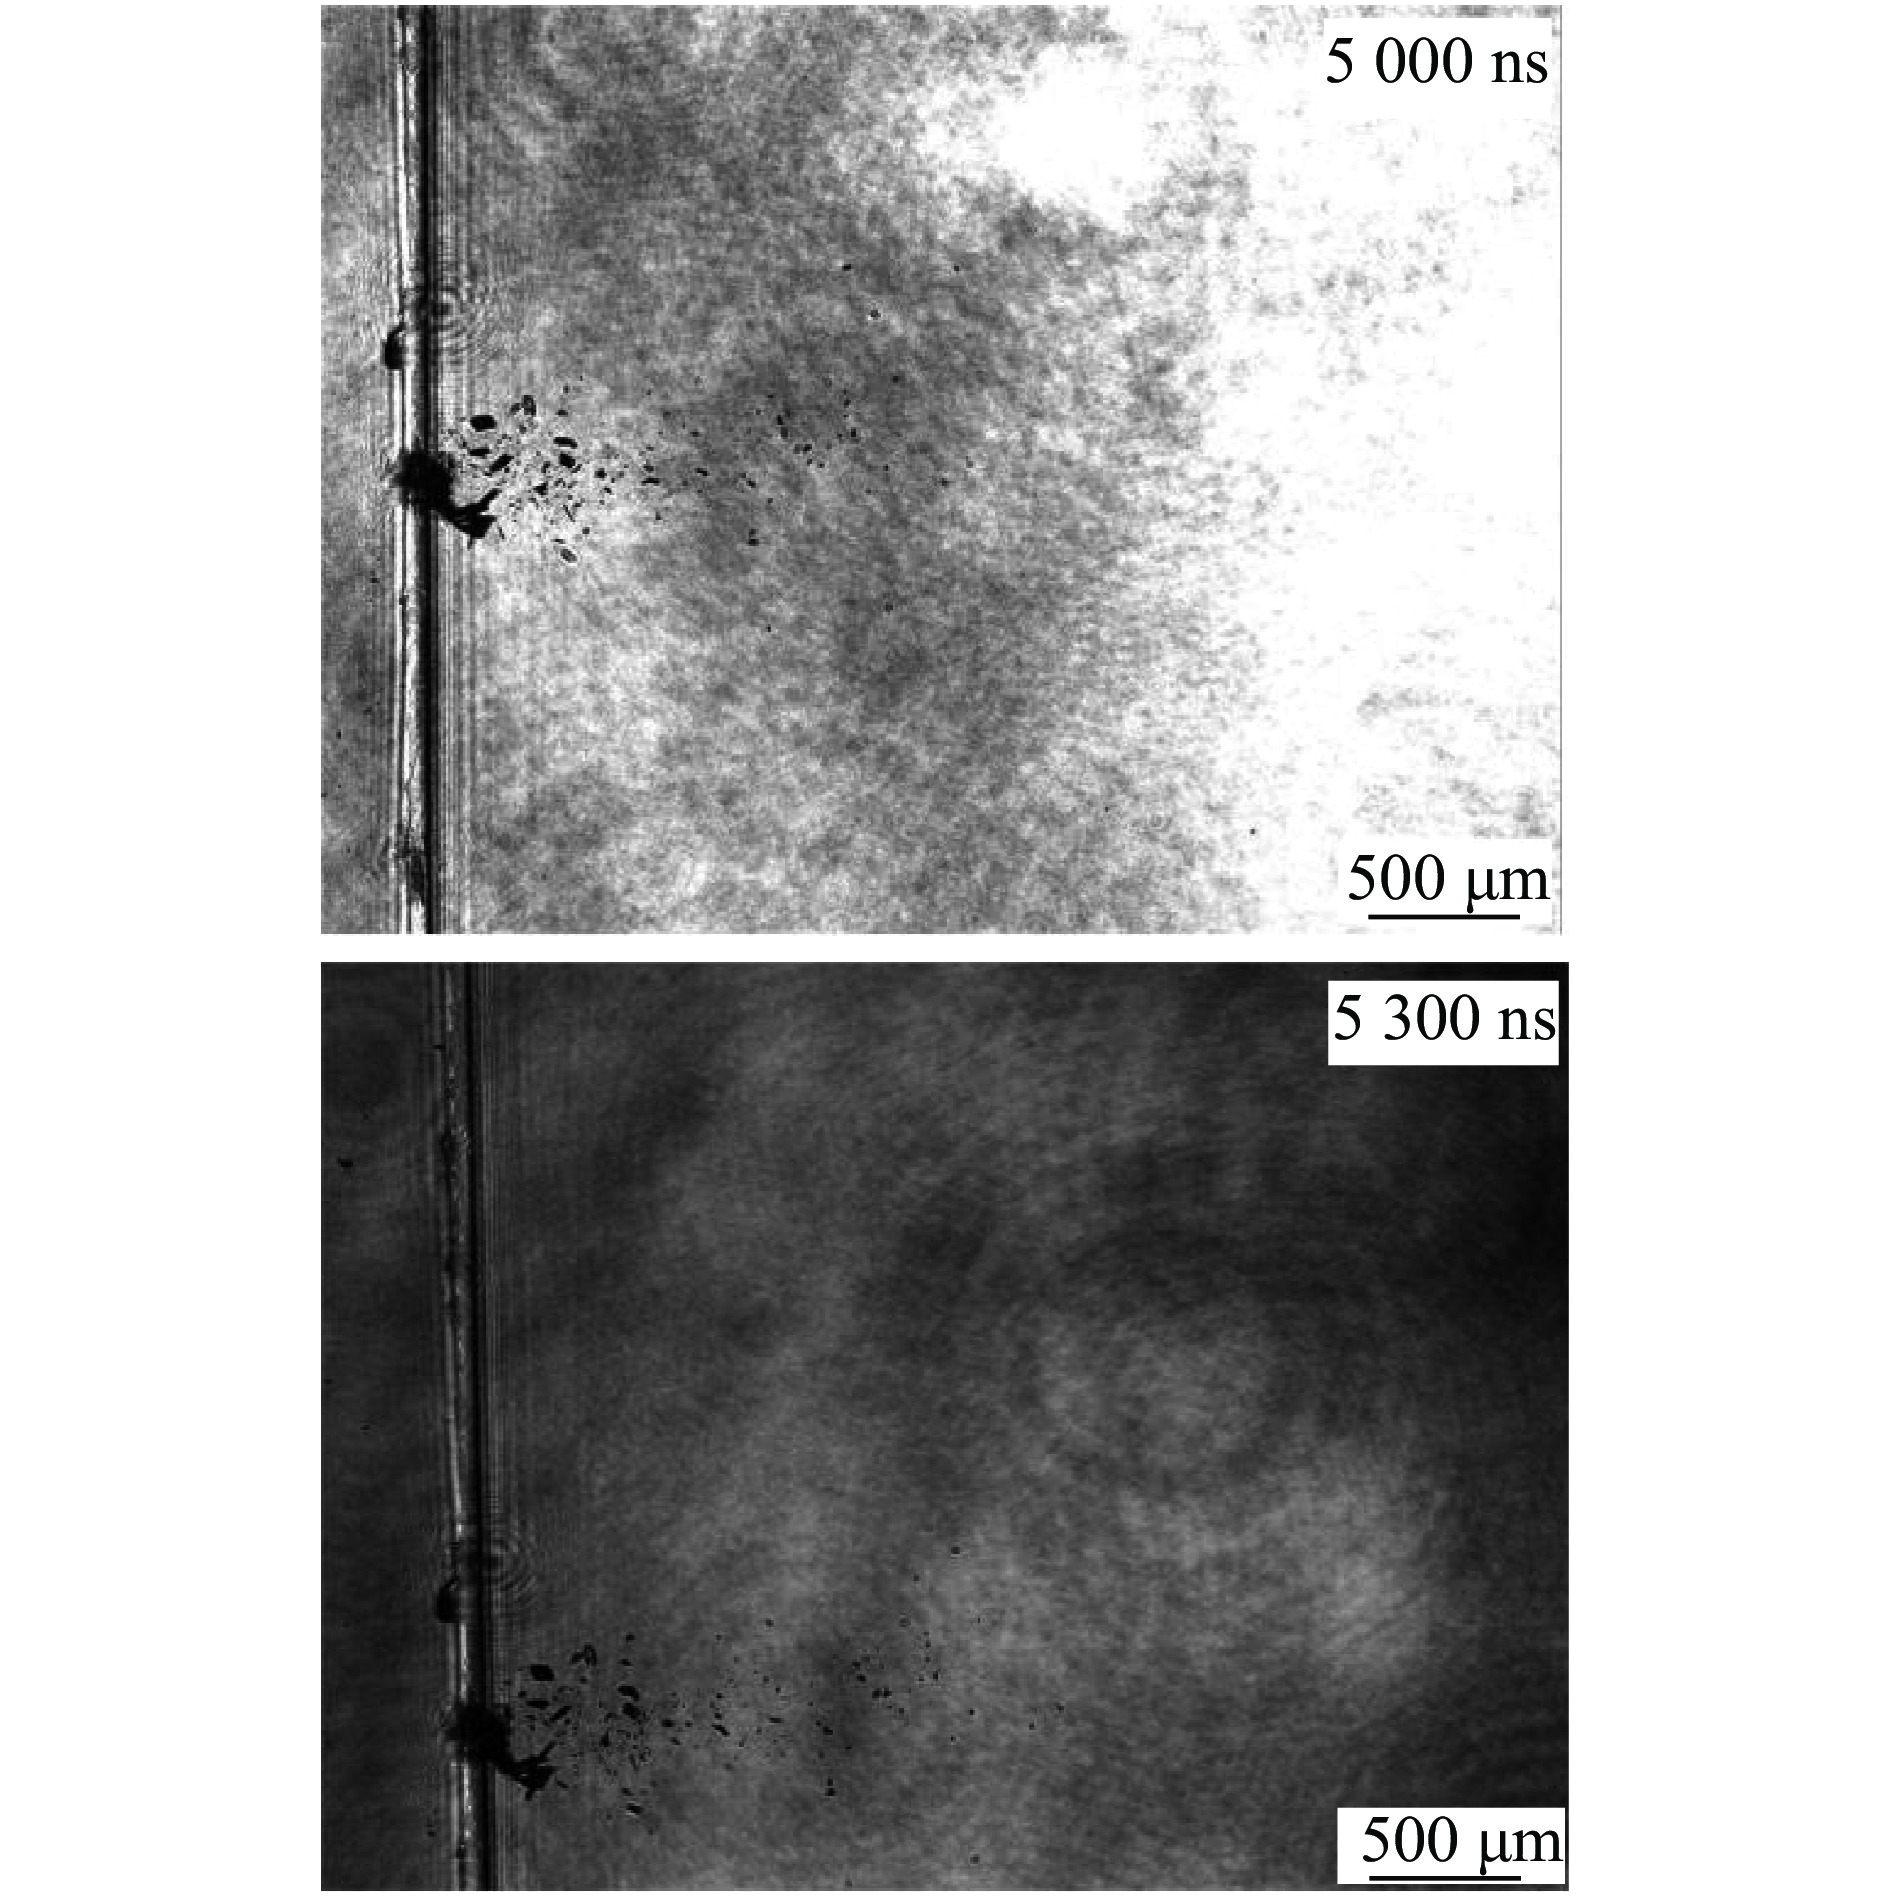 Typical experimental images obtained by the two-frame shadowgraphy system